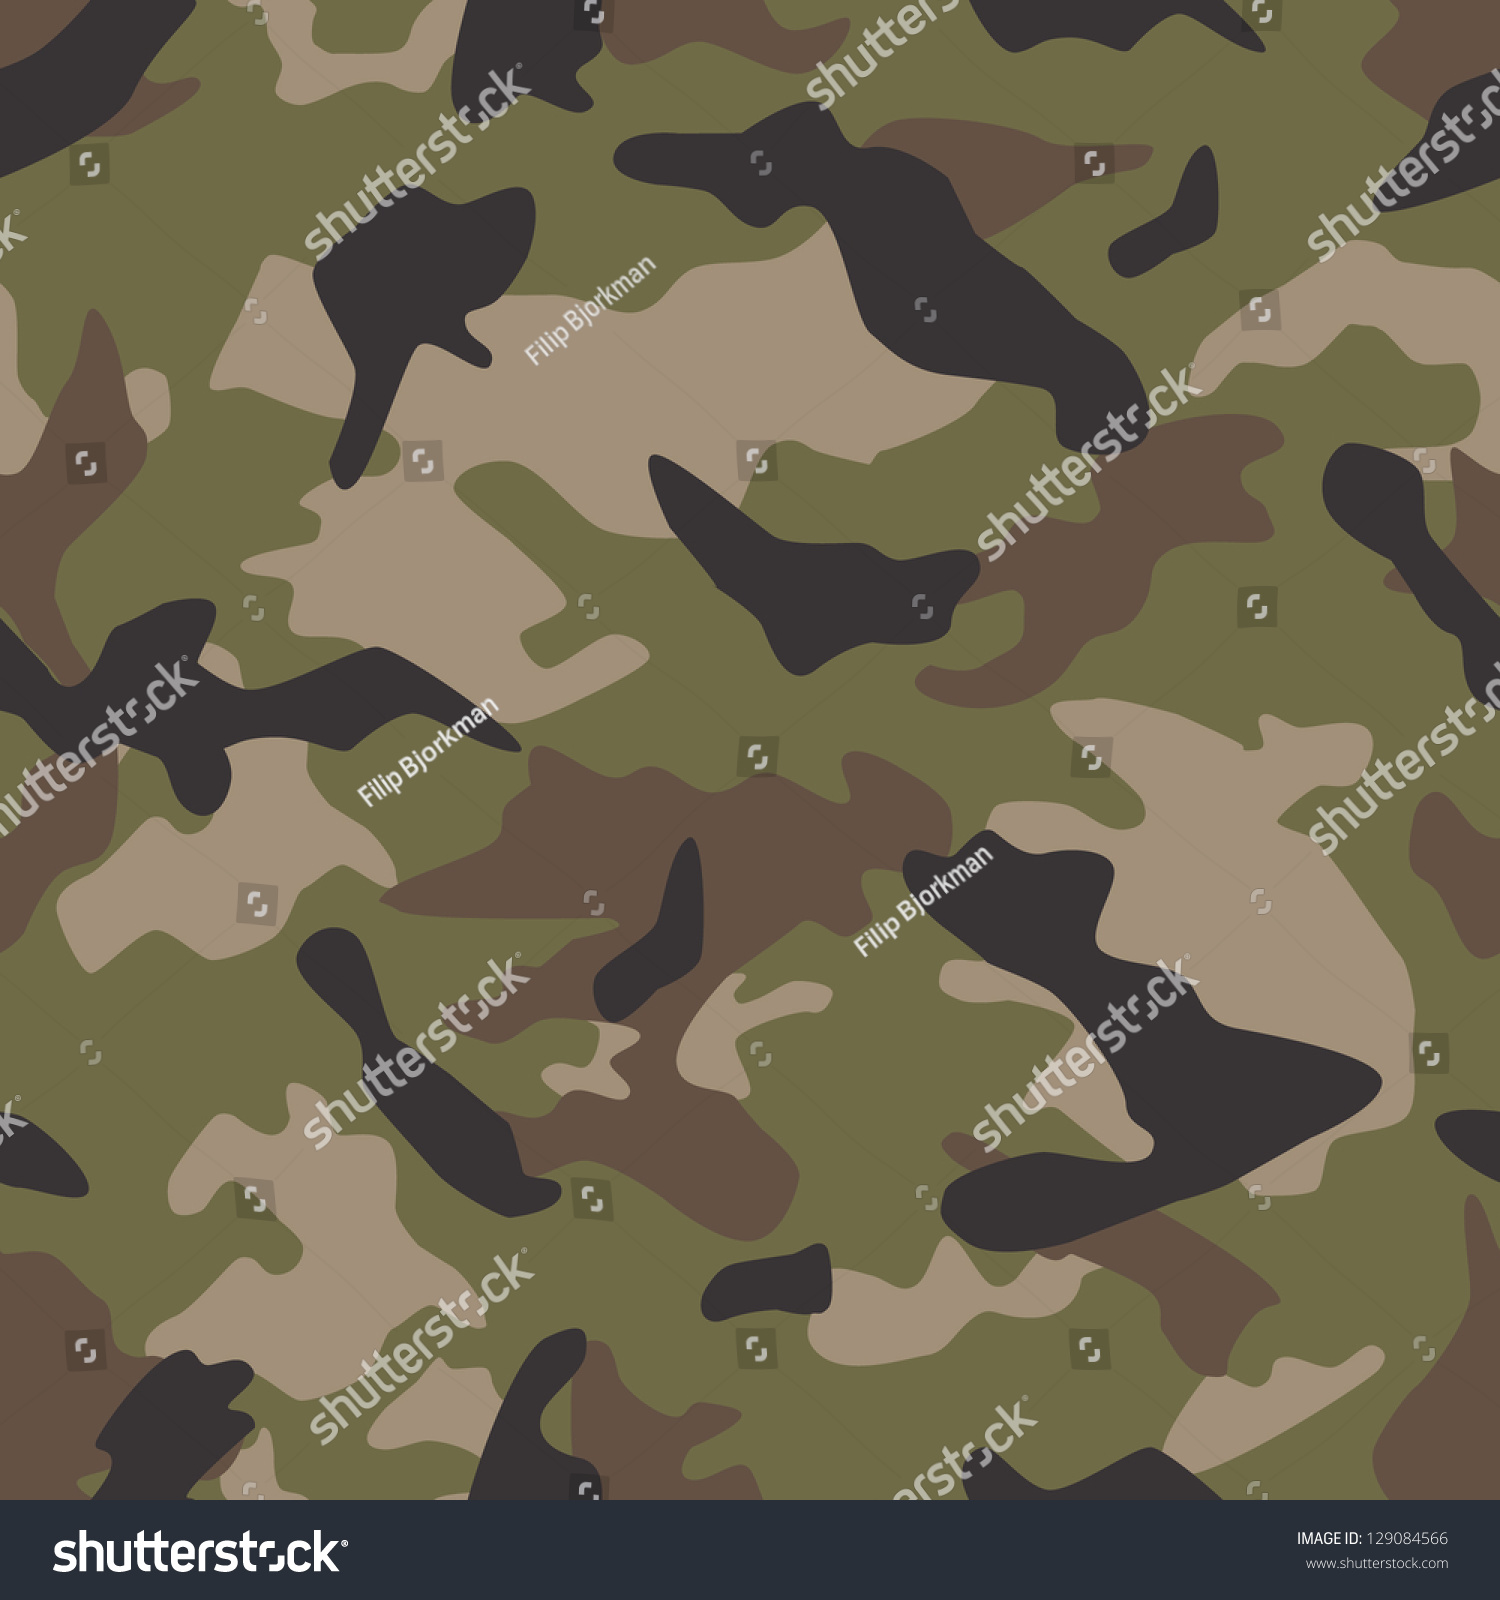 Seamless Vector Square Camouflage Series Us Stock Vector 129084566 ...